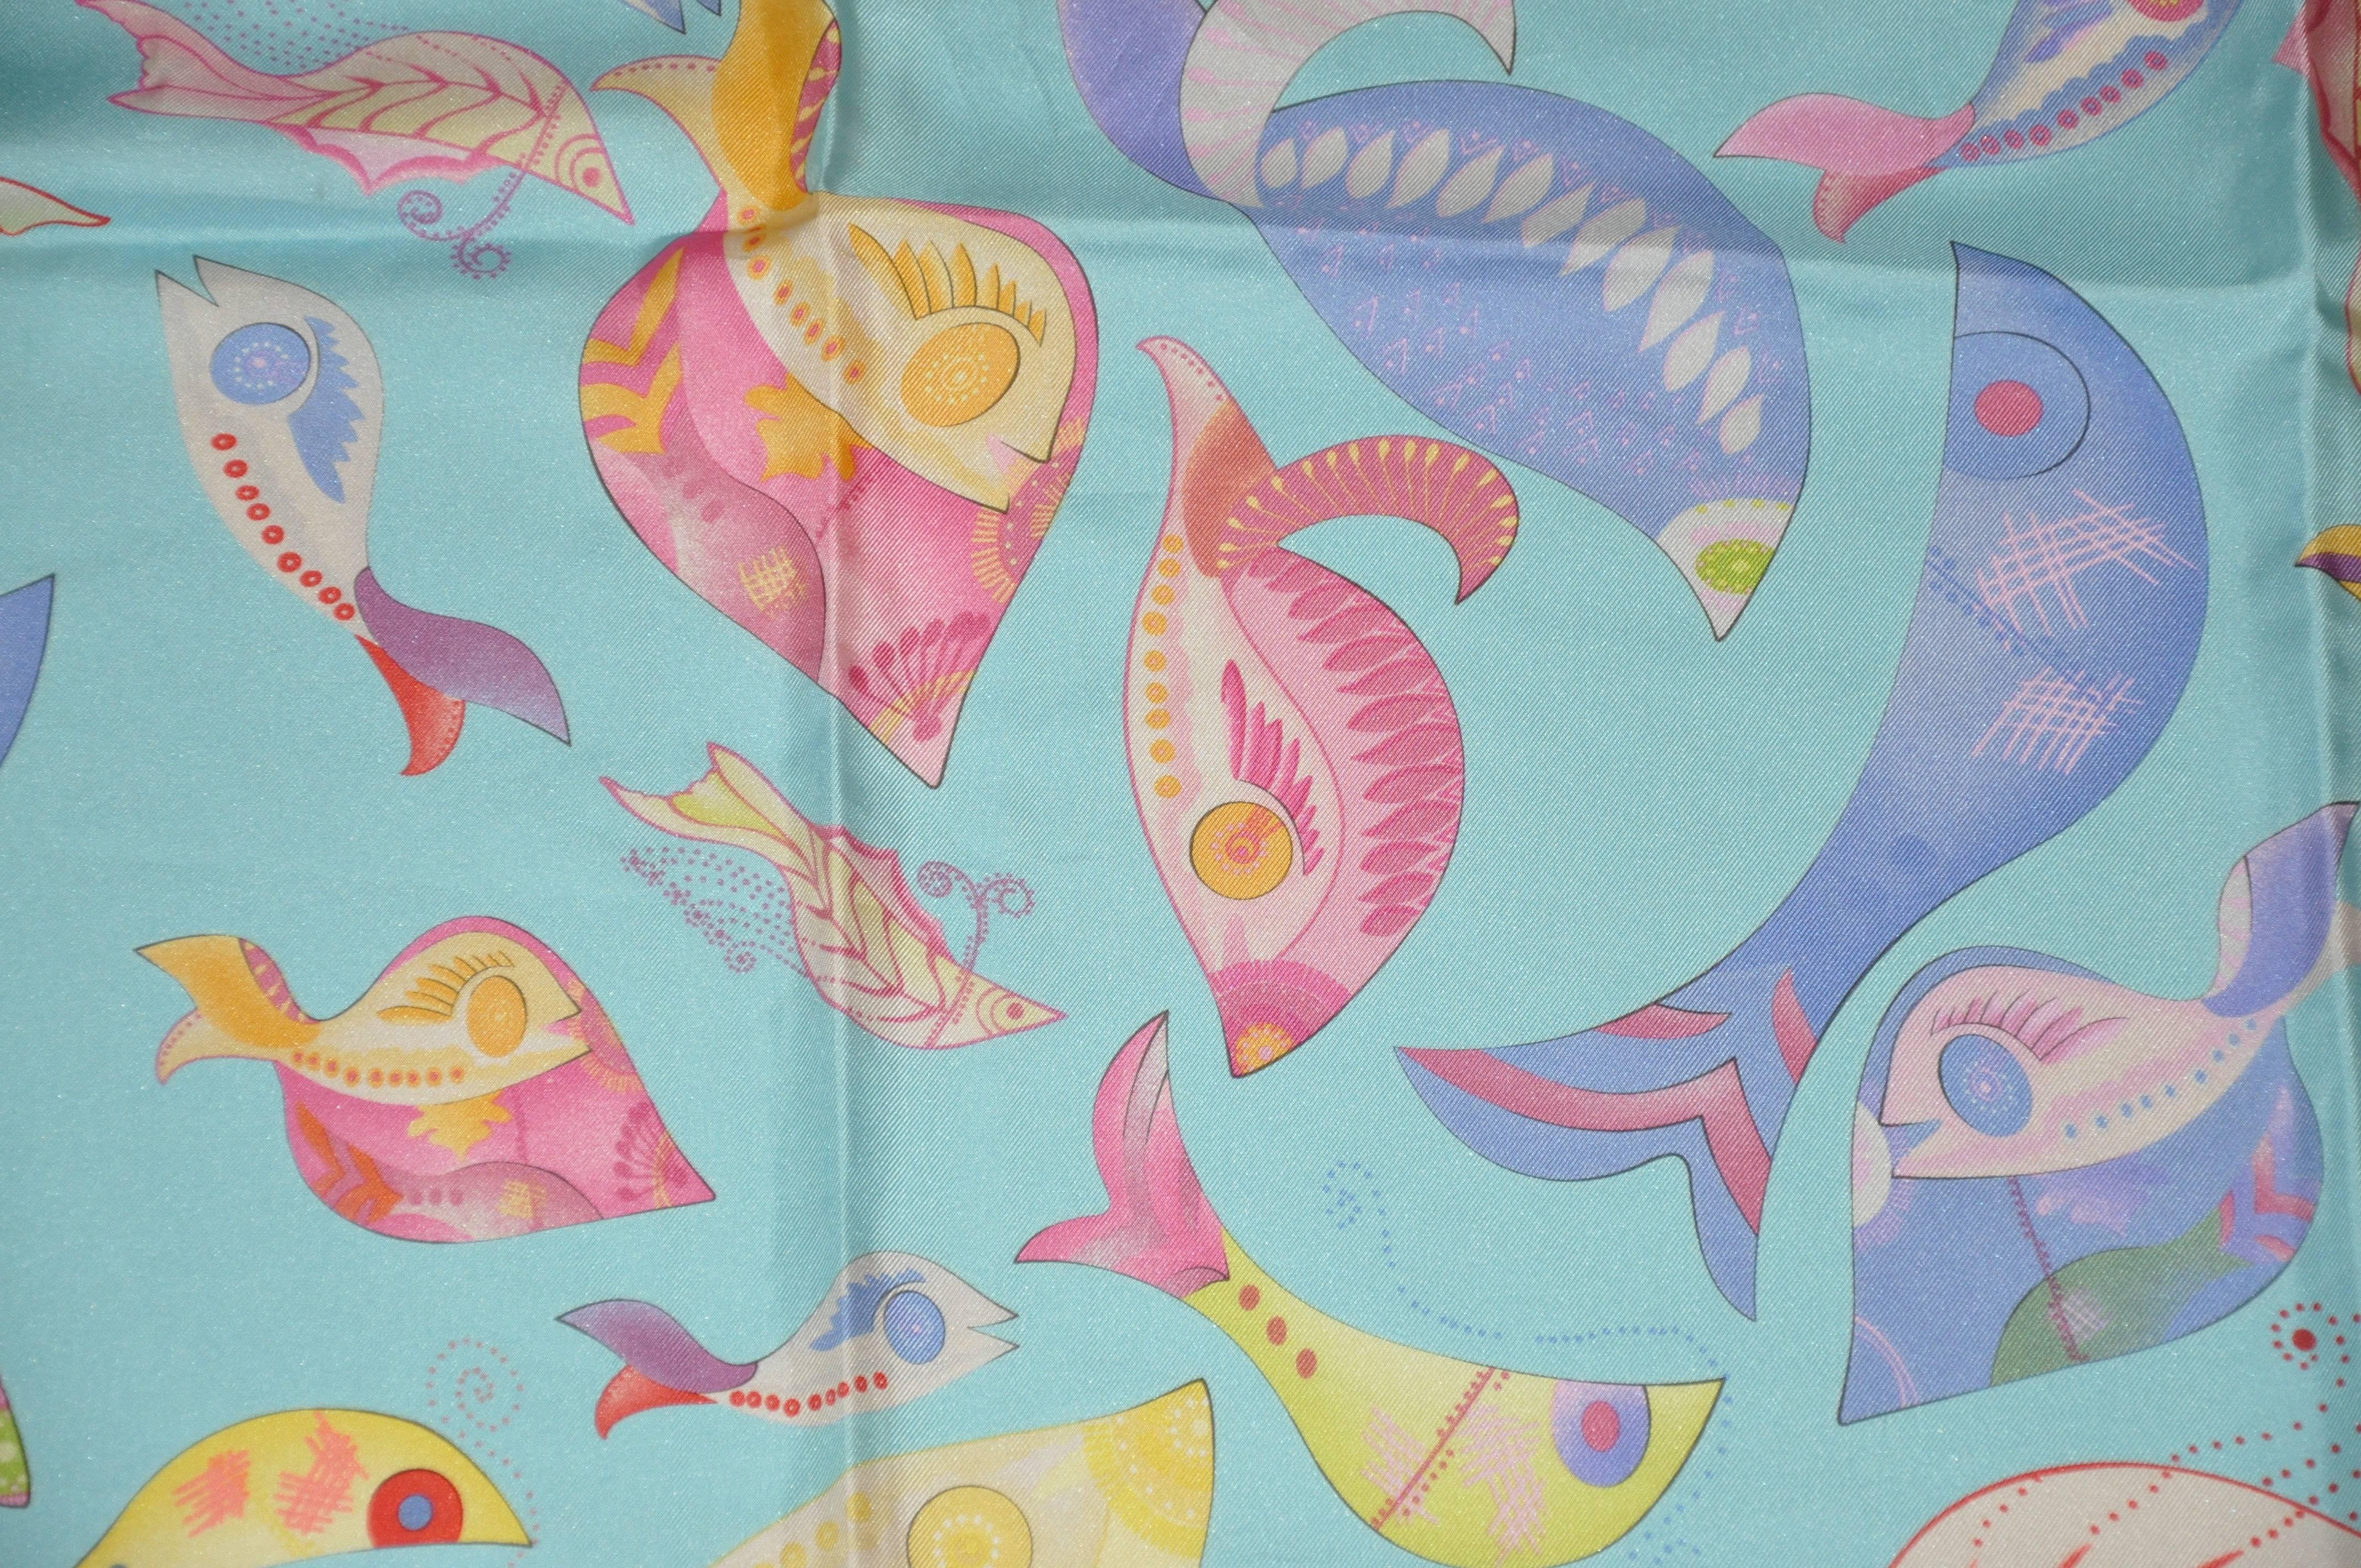 Salvatore Ferragamo wonderfully detailed "Creatures of the Sea" whimsical silk jacquard scarf measures 34" x 34" and finished with hand-rolled edges. Made in Italy.